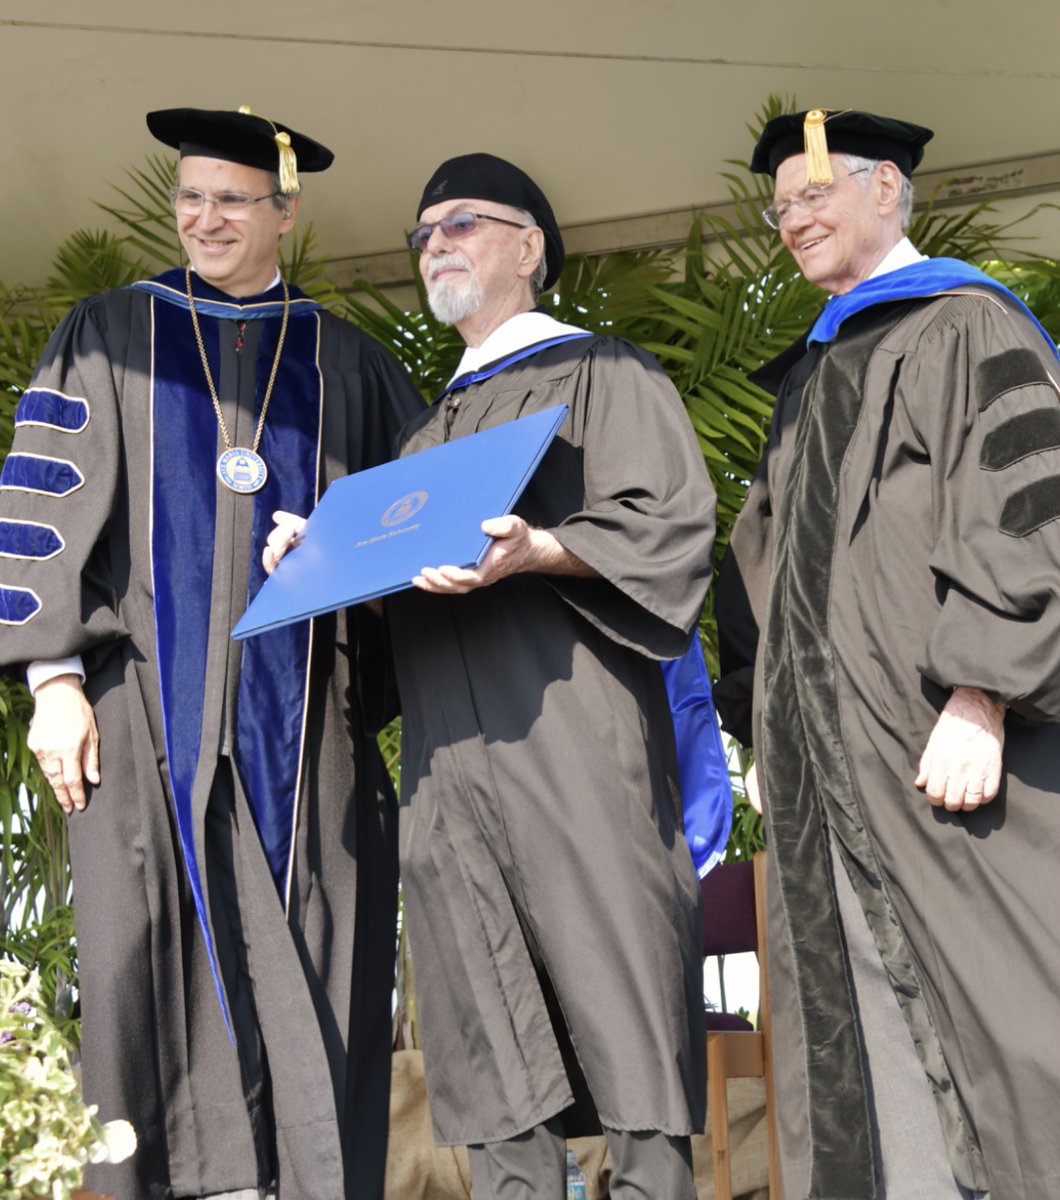 Here I am, Yours Truly, receiving an honorary doctorate from Ave Maria University, standing with University president Mark Middendorf & founder Tom Monaghan. What a beautiful, glorious commencement ceremony. Proud to call this place my alma mater & these kids my fellow alumni.